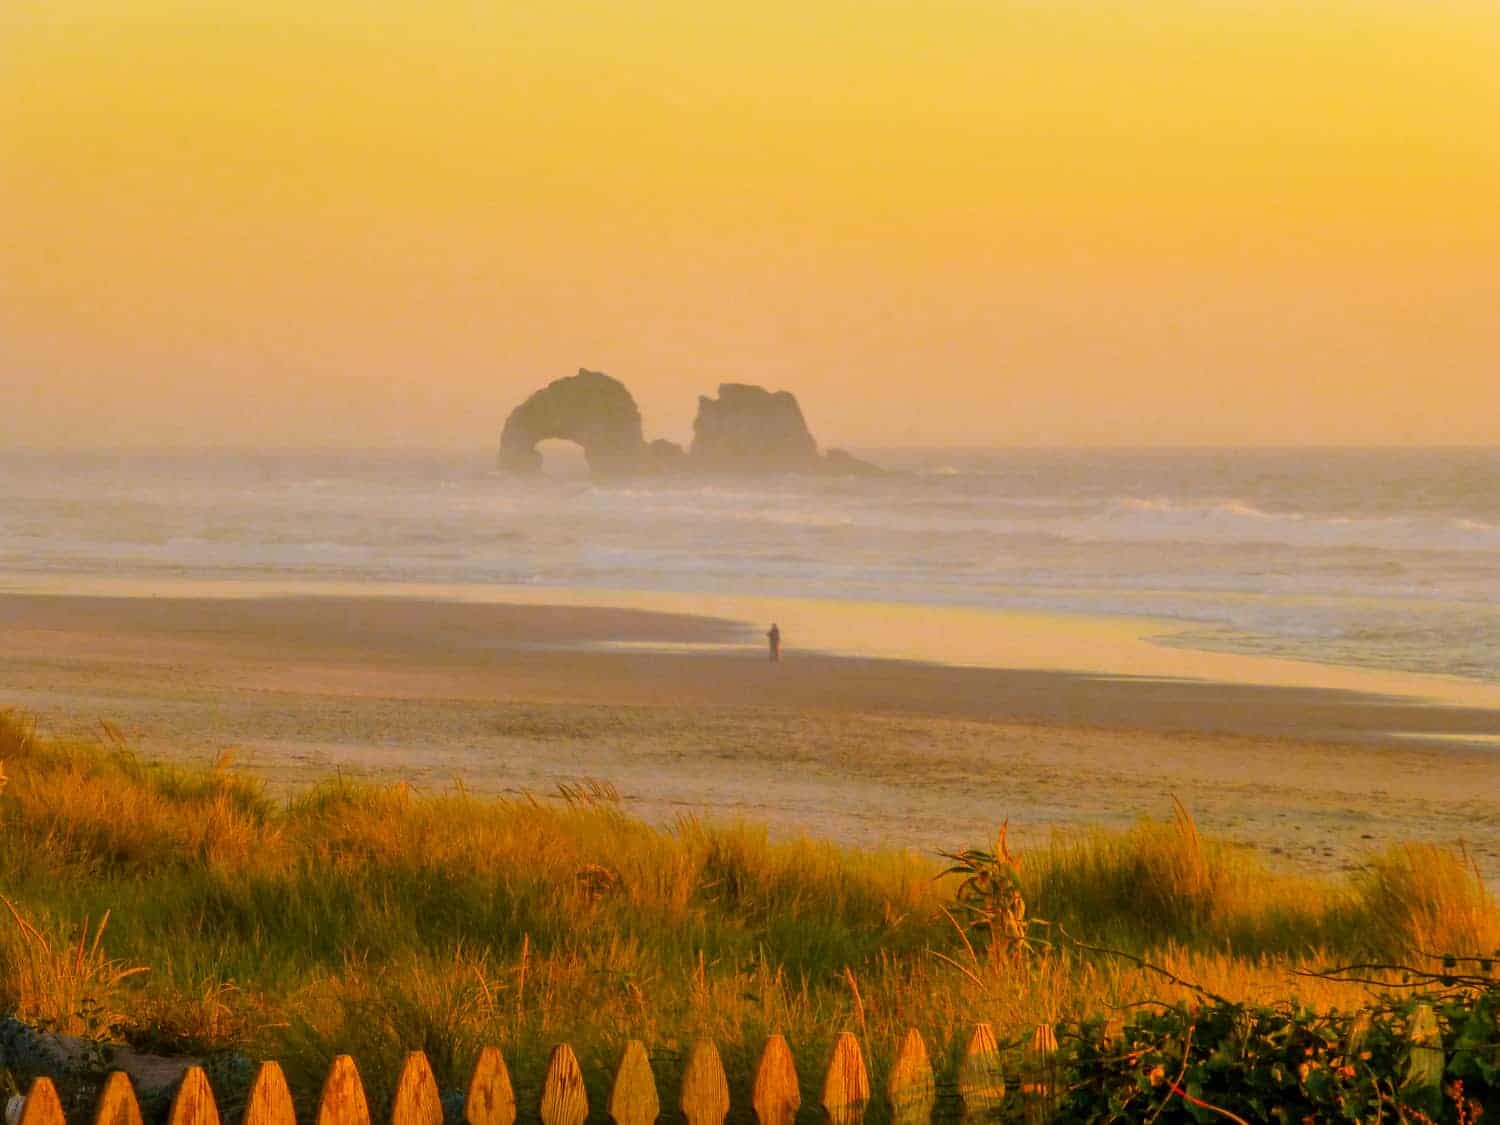 Rockaway Beach is a sleepy town perfect for visiting Oregon with kids.